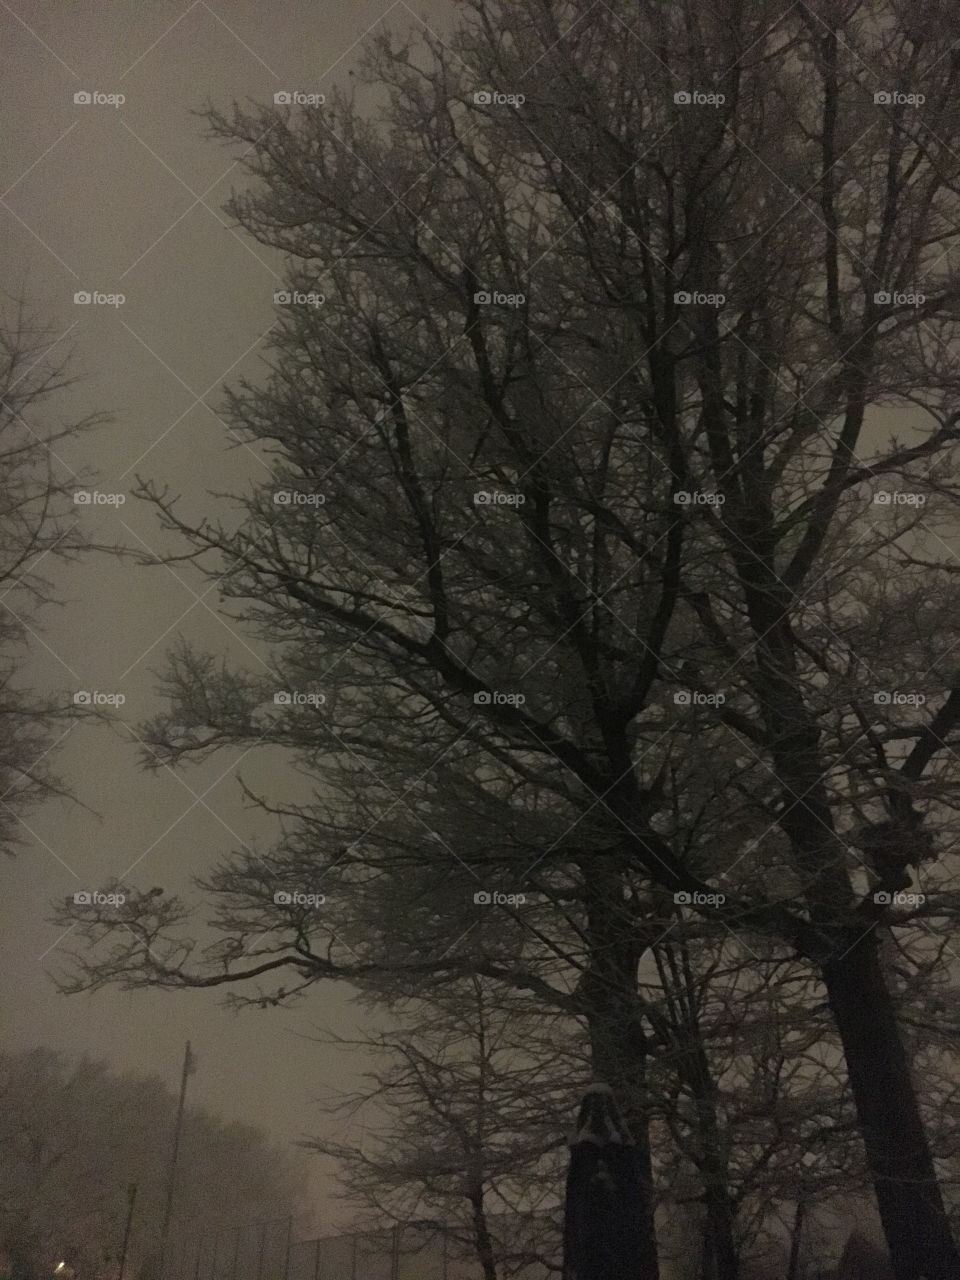 Late night with trees covered in snow